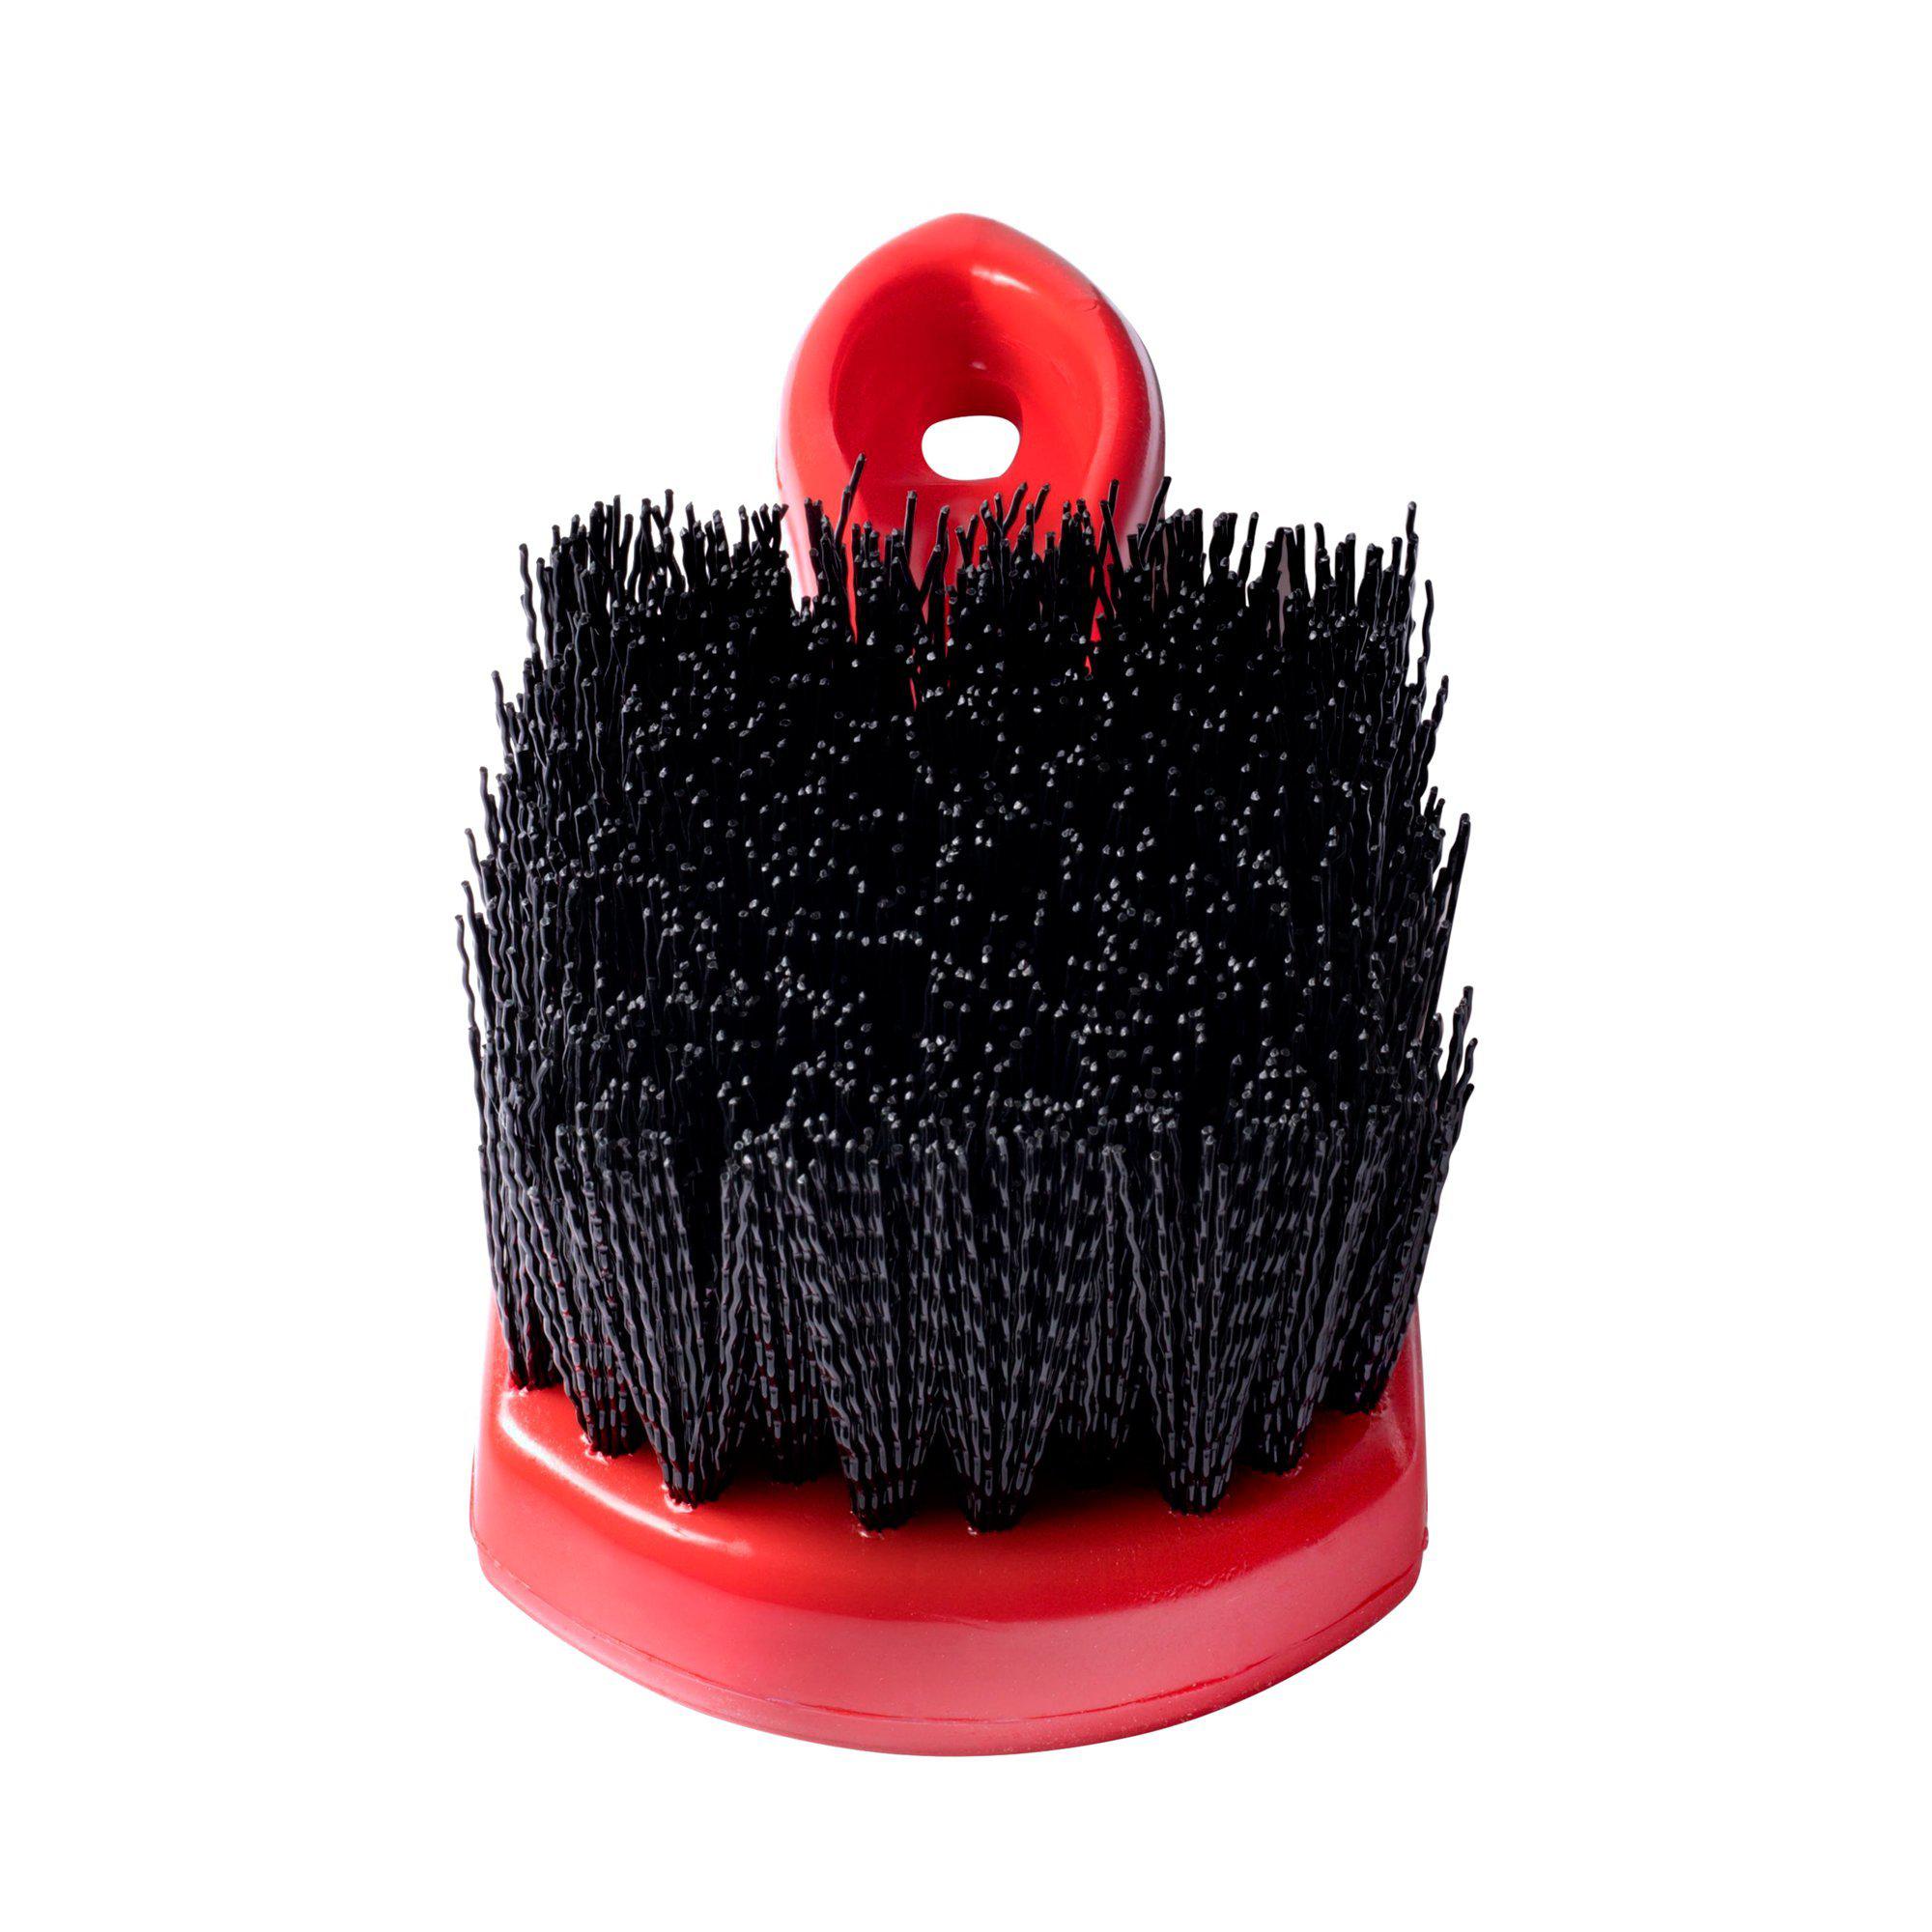 Fuller Brush Barbecue Grill Brush - Heavy Duty Cleaning Scrub w